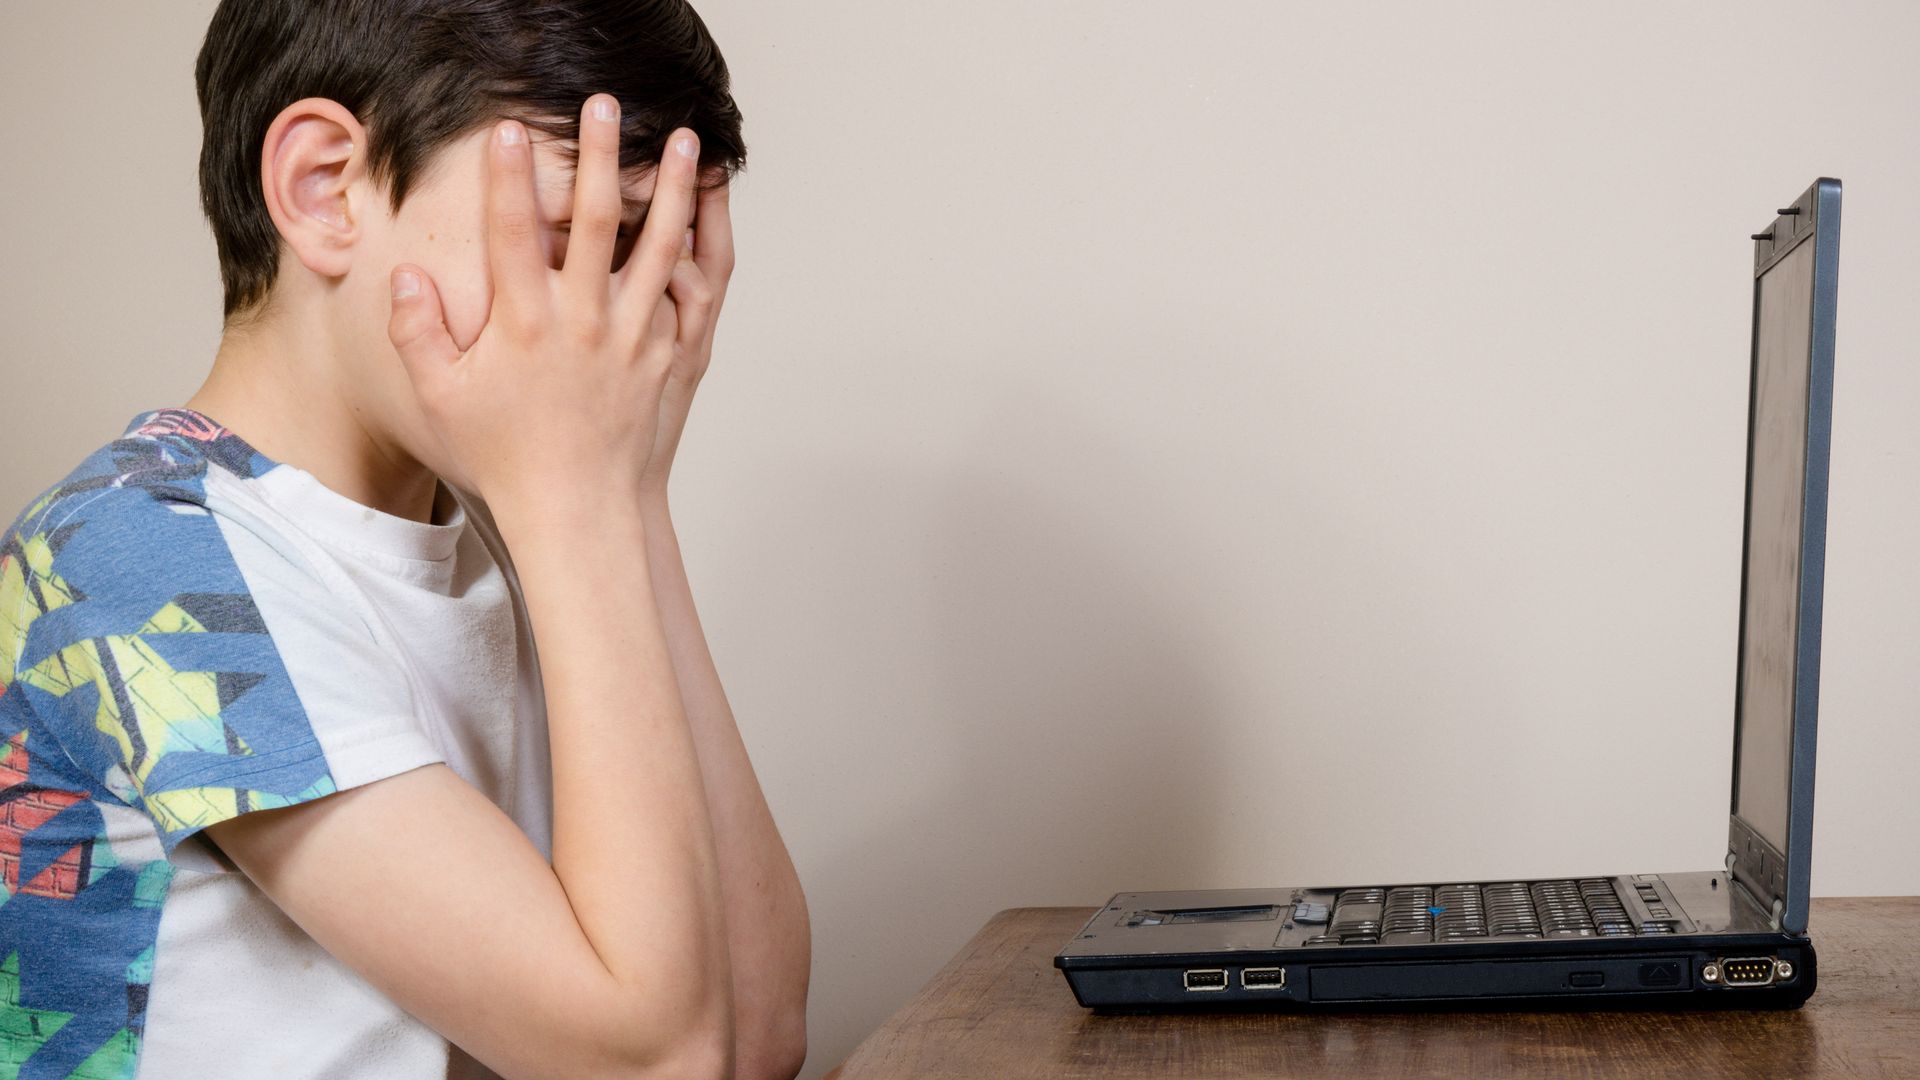 I was groomed online at age 14 – I was scared and alone, then Childline saved me